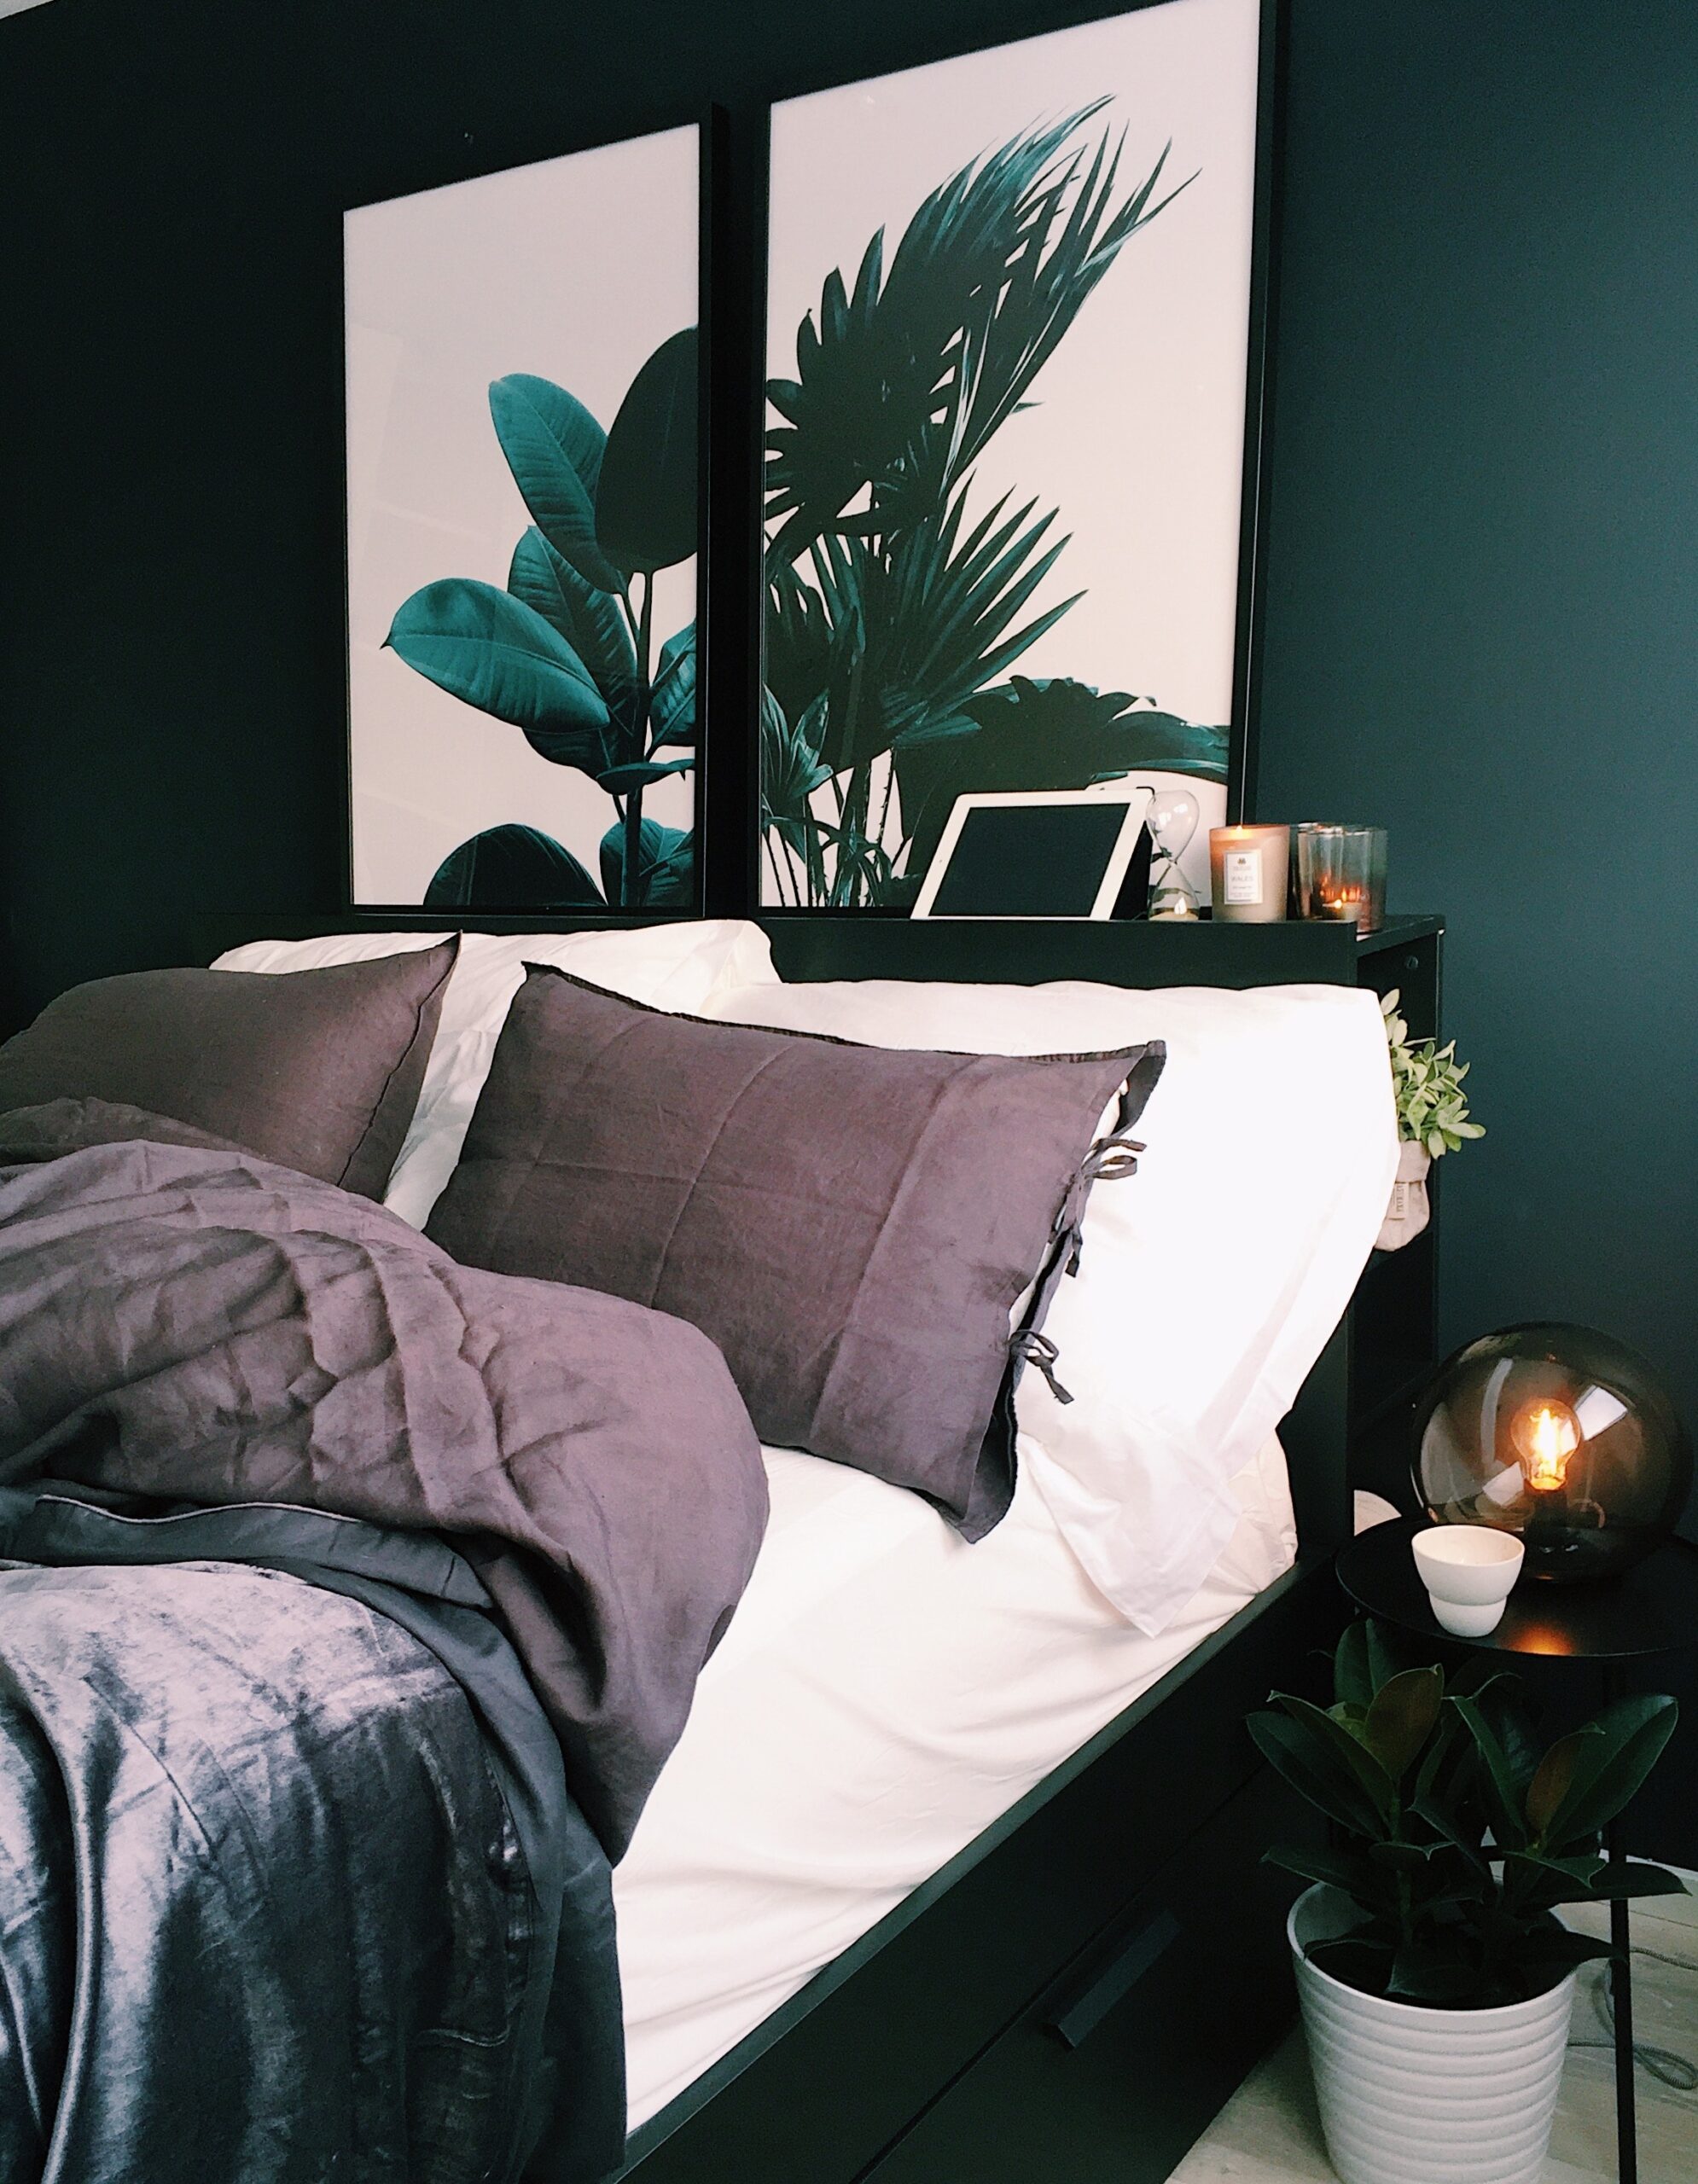 Cosy bed with lots of pillows, a bedhead containing candles and images of lush green leaves.